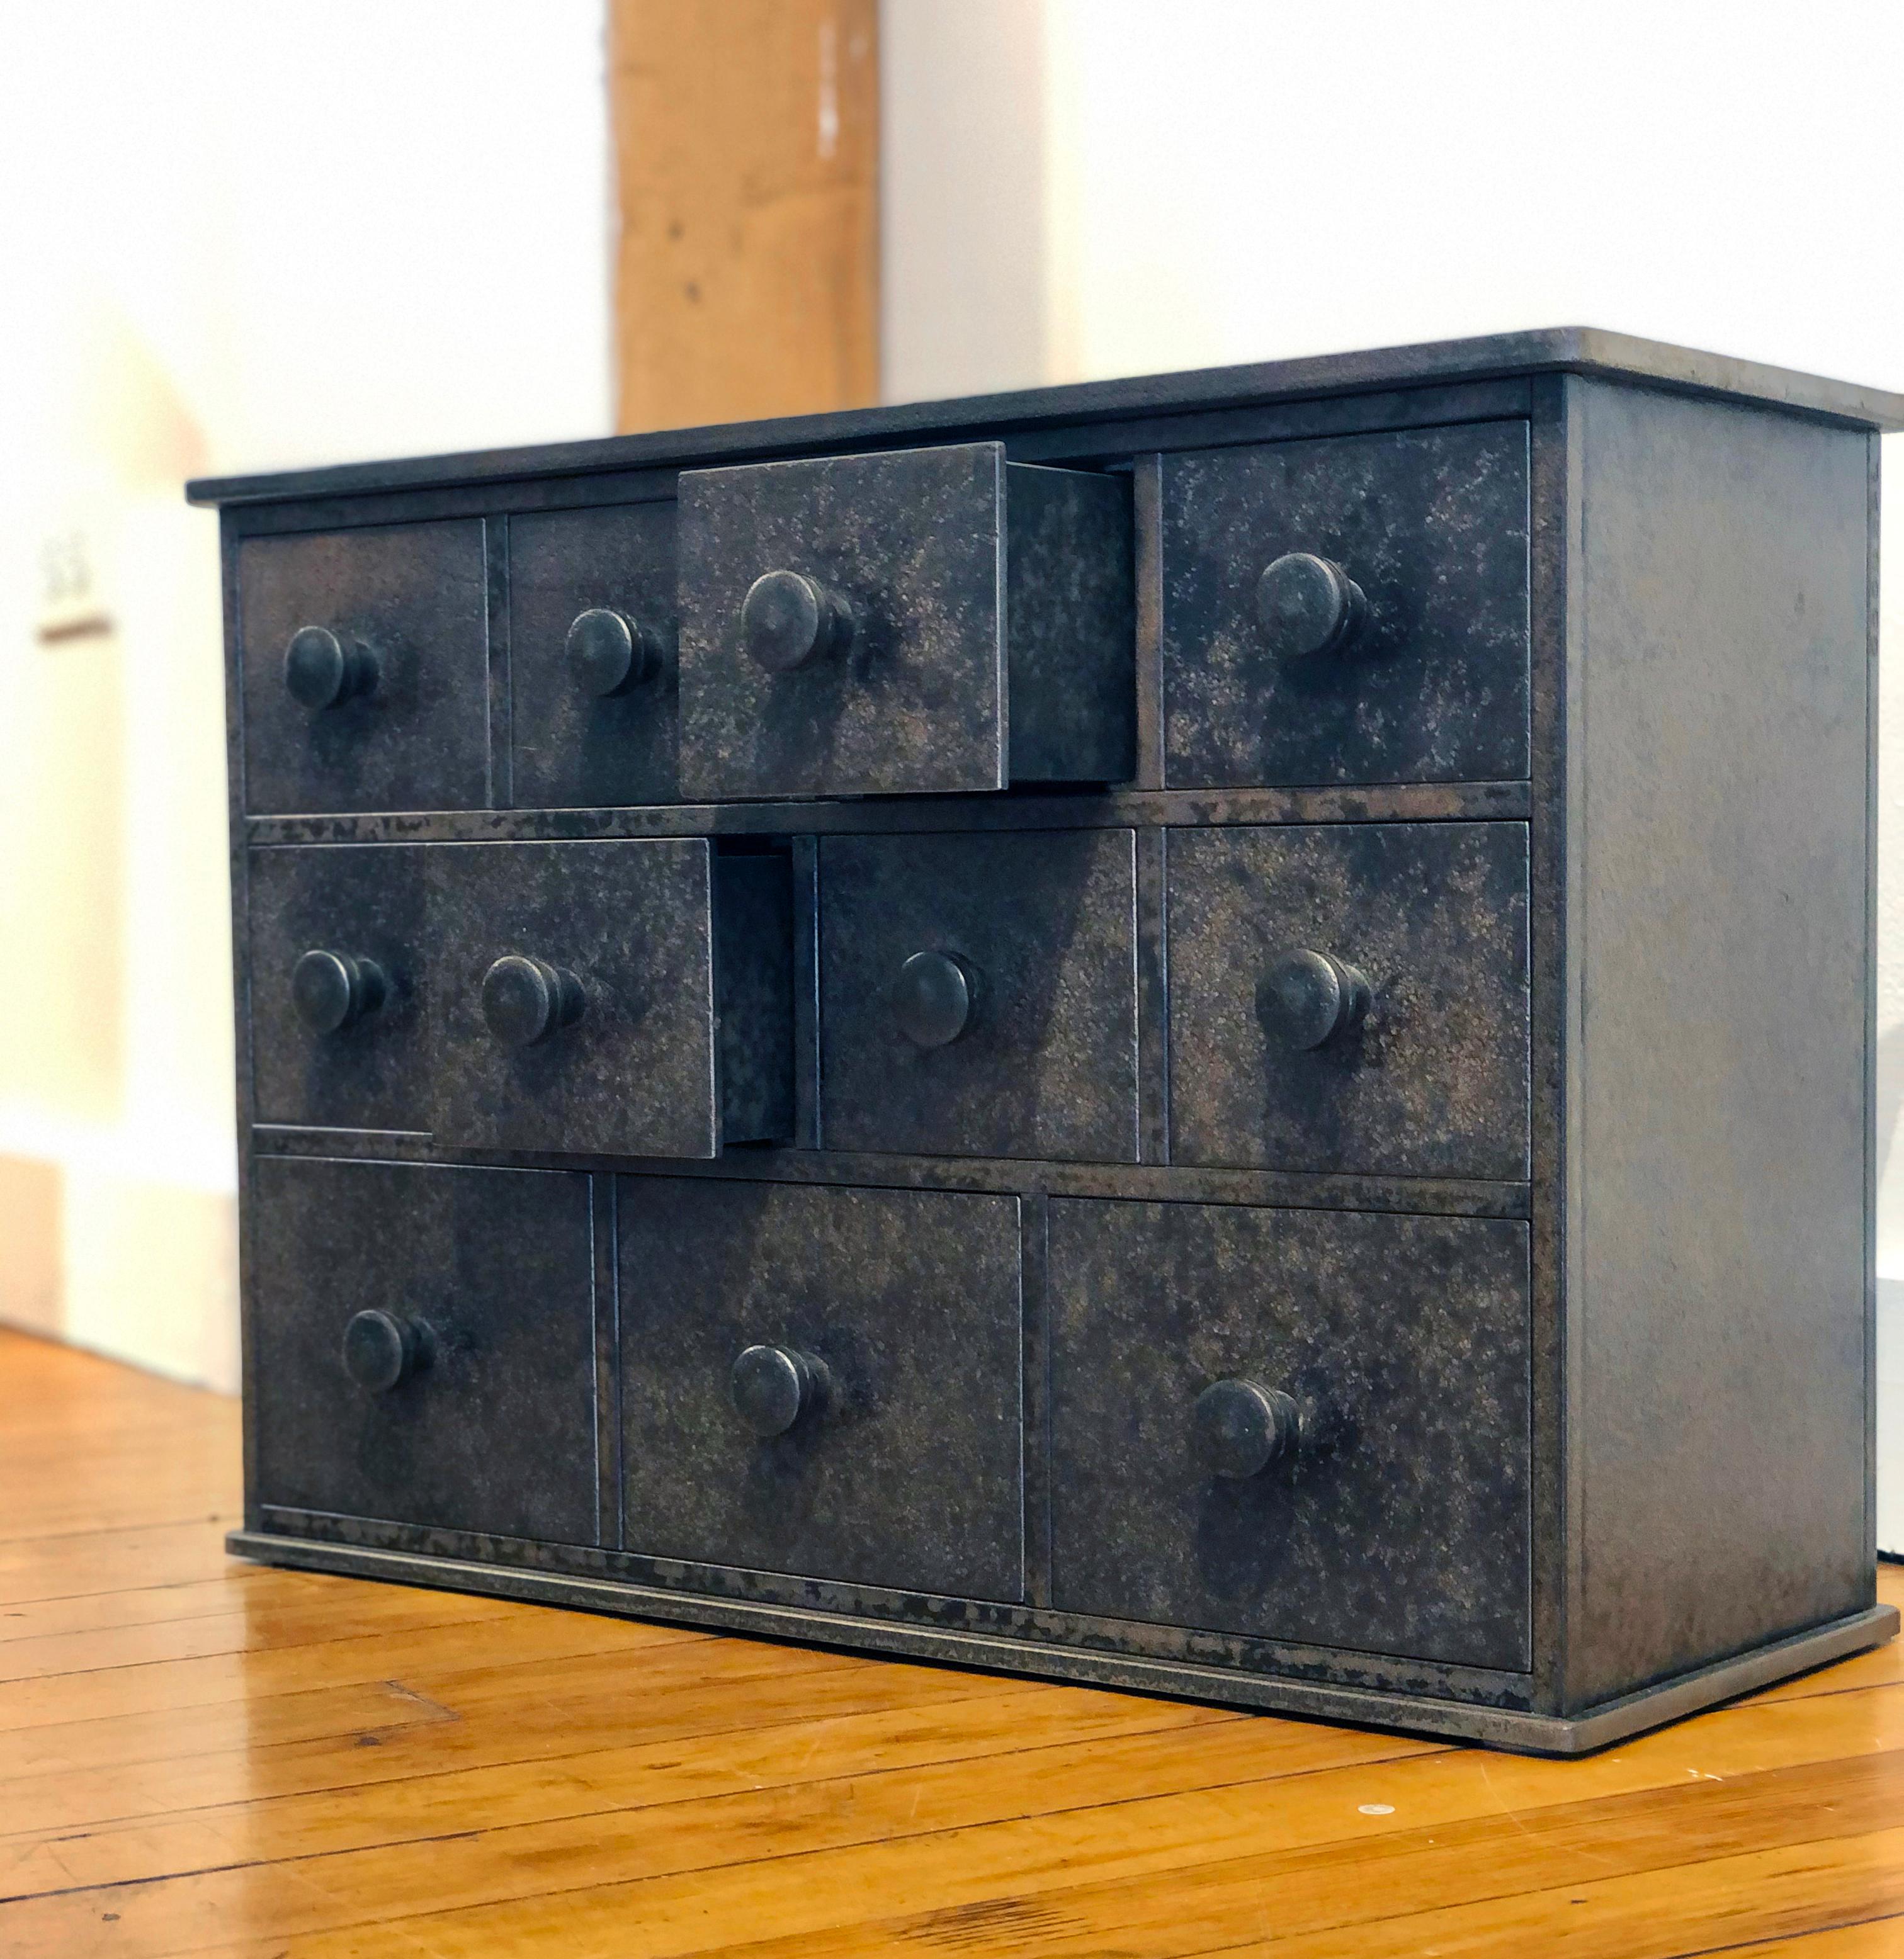 Welded Jim Rose Legacy Collection - 11 Drawer Steel Apothecary Cabinet, Shaker Inspired For Sale